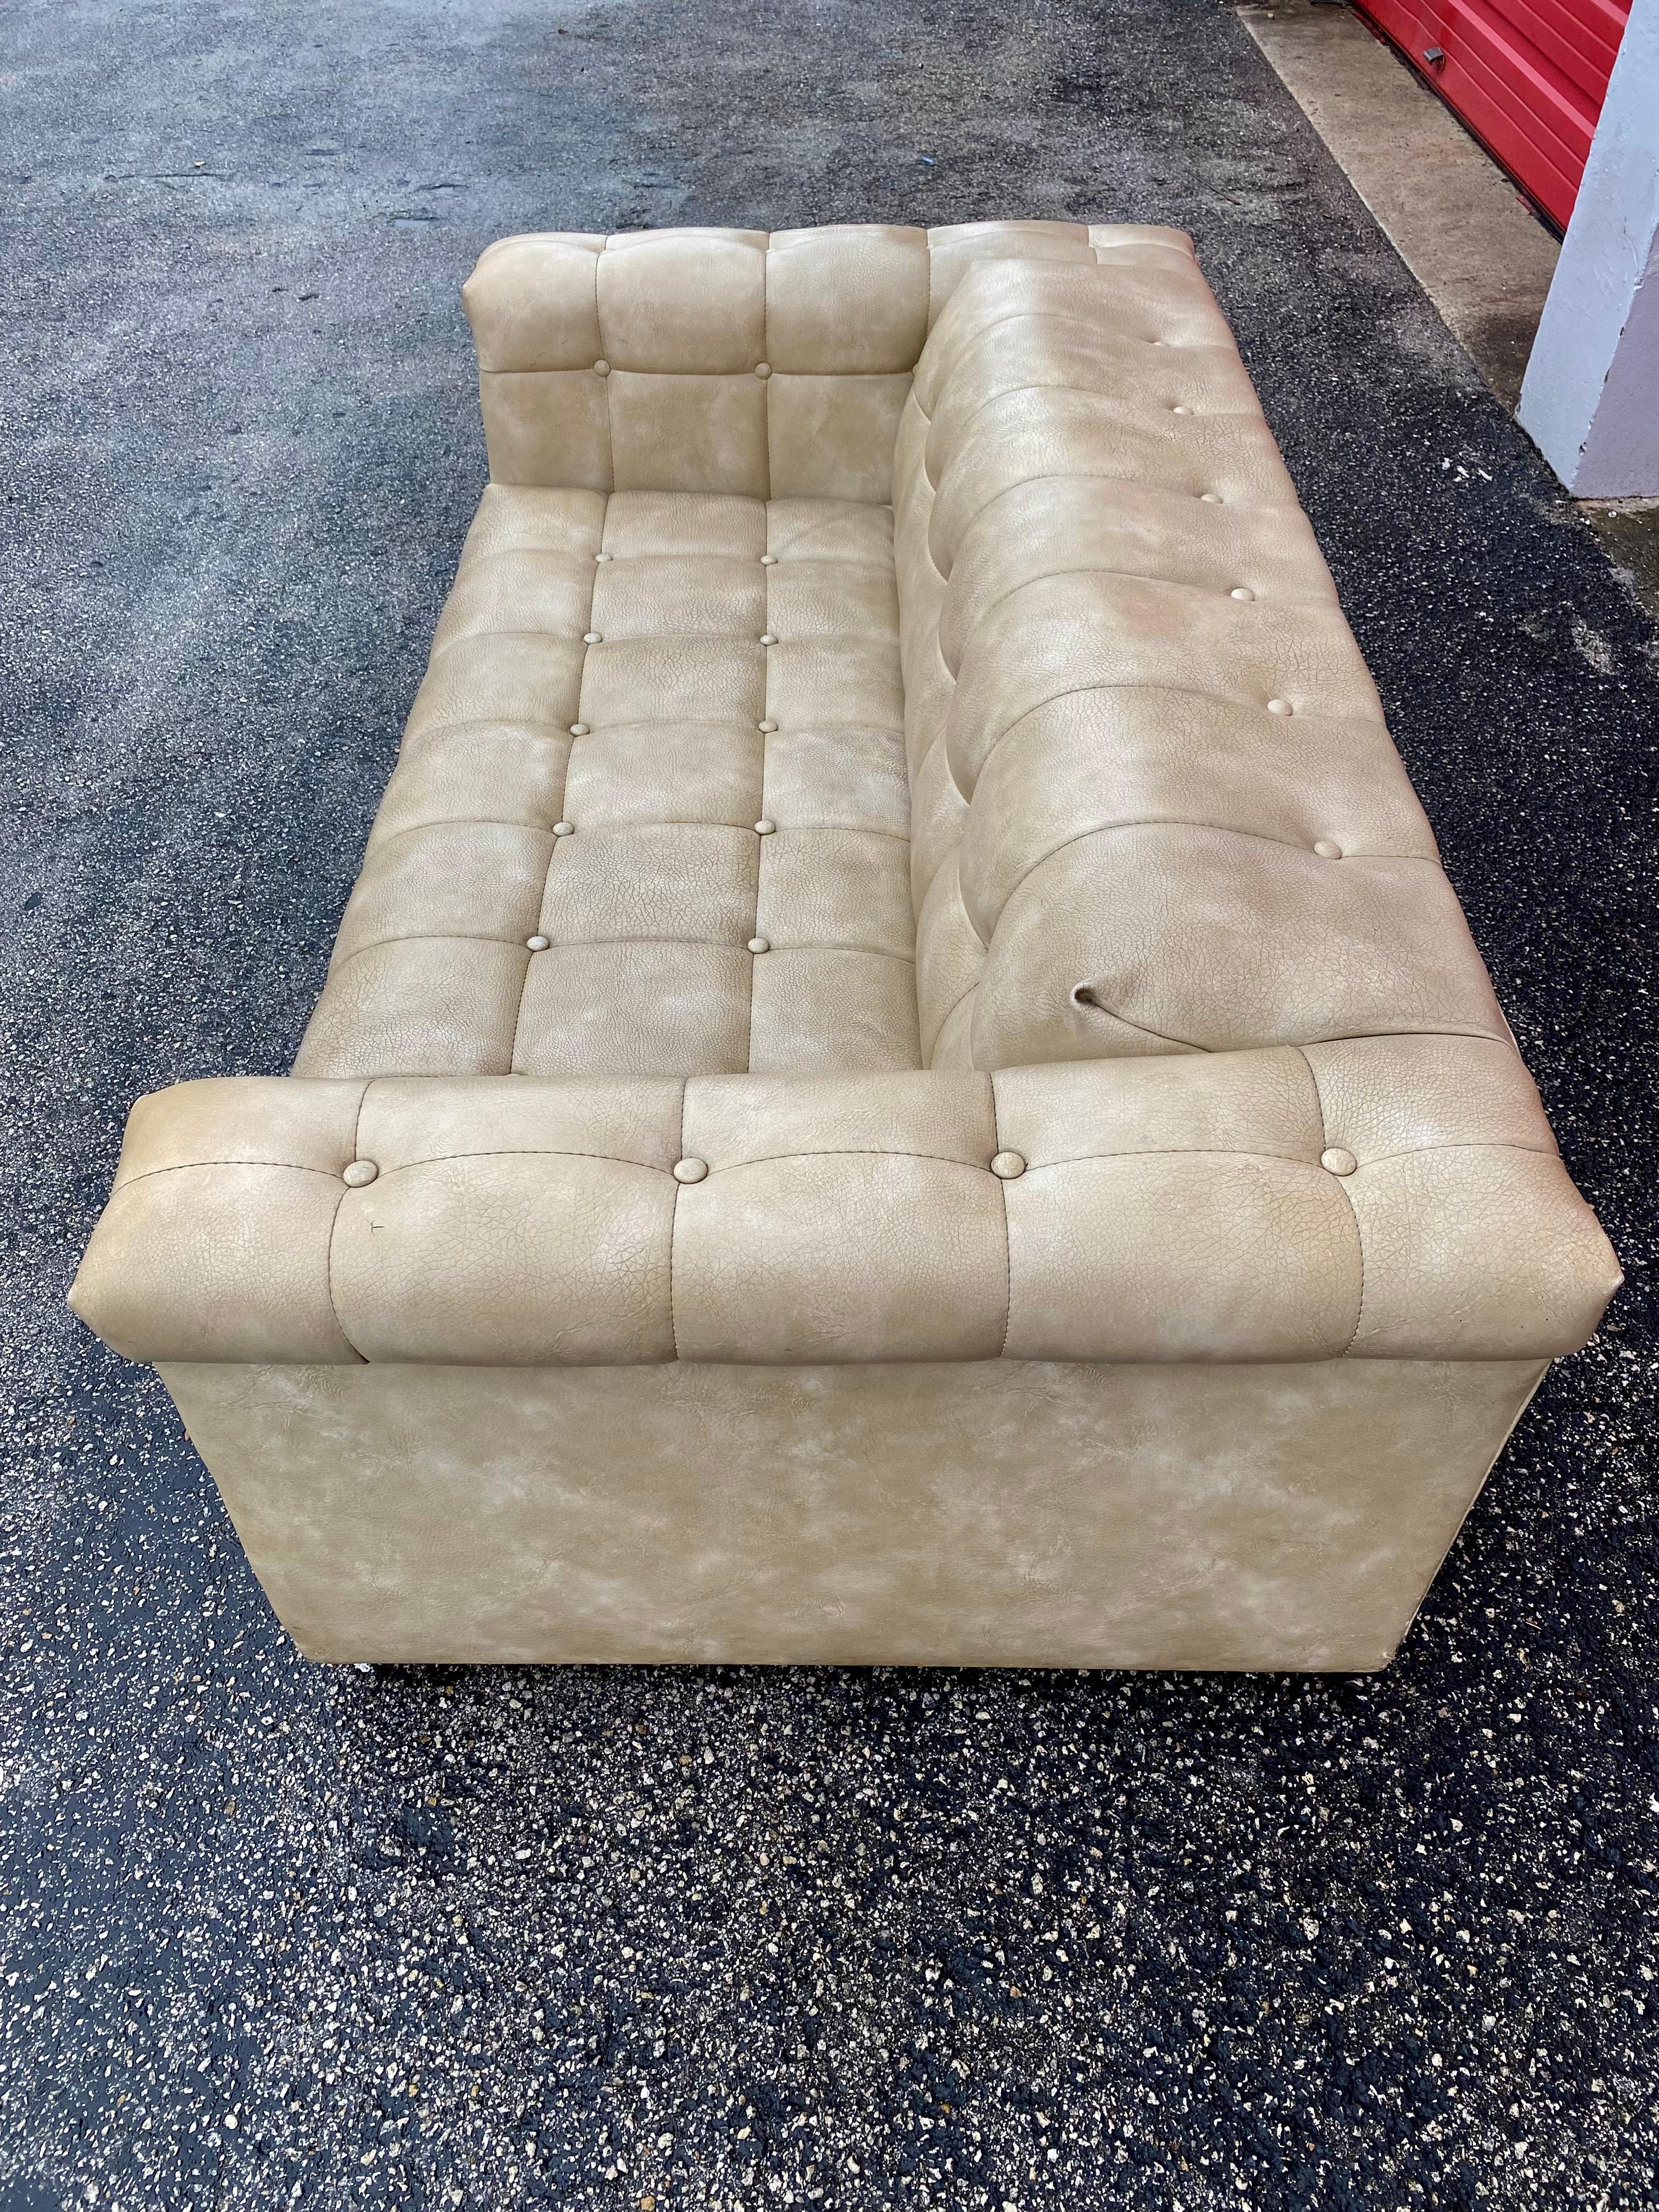 1960s Milo Baughman Style Button-Tufted Biscuit Distressed Sofa For Sale 3